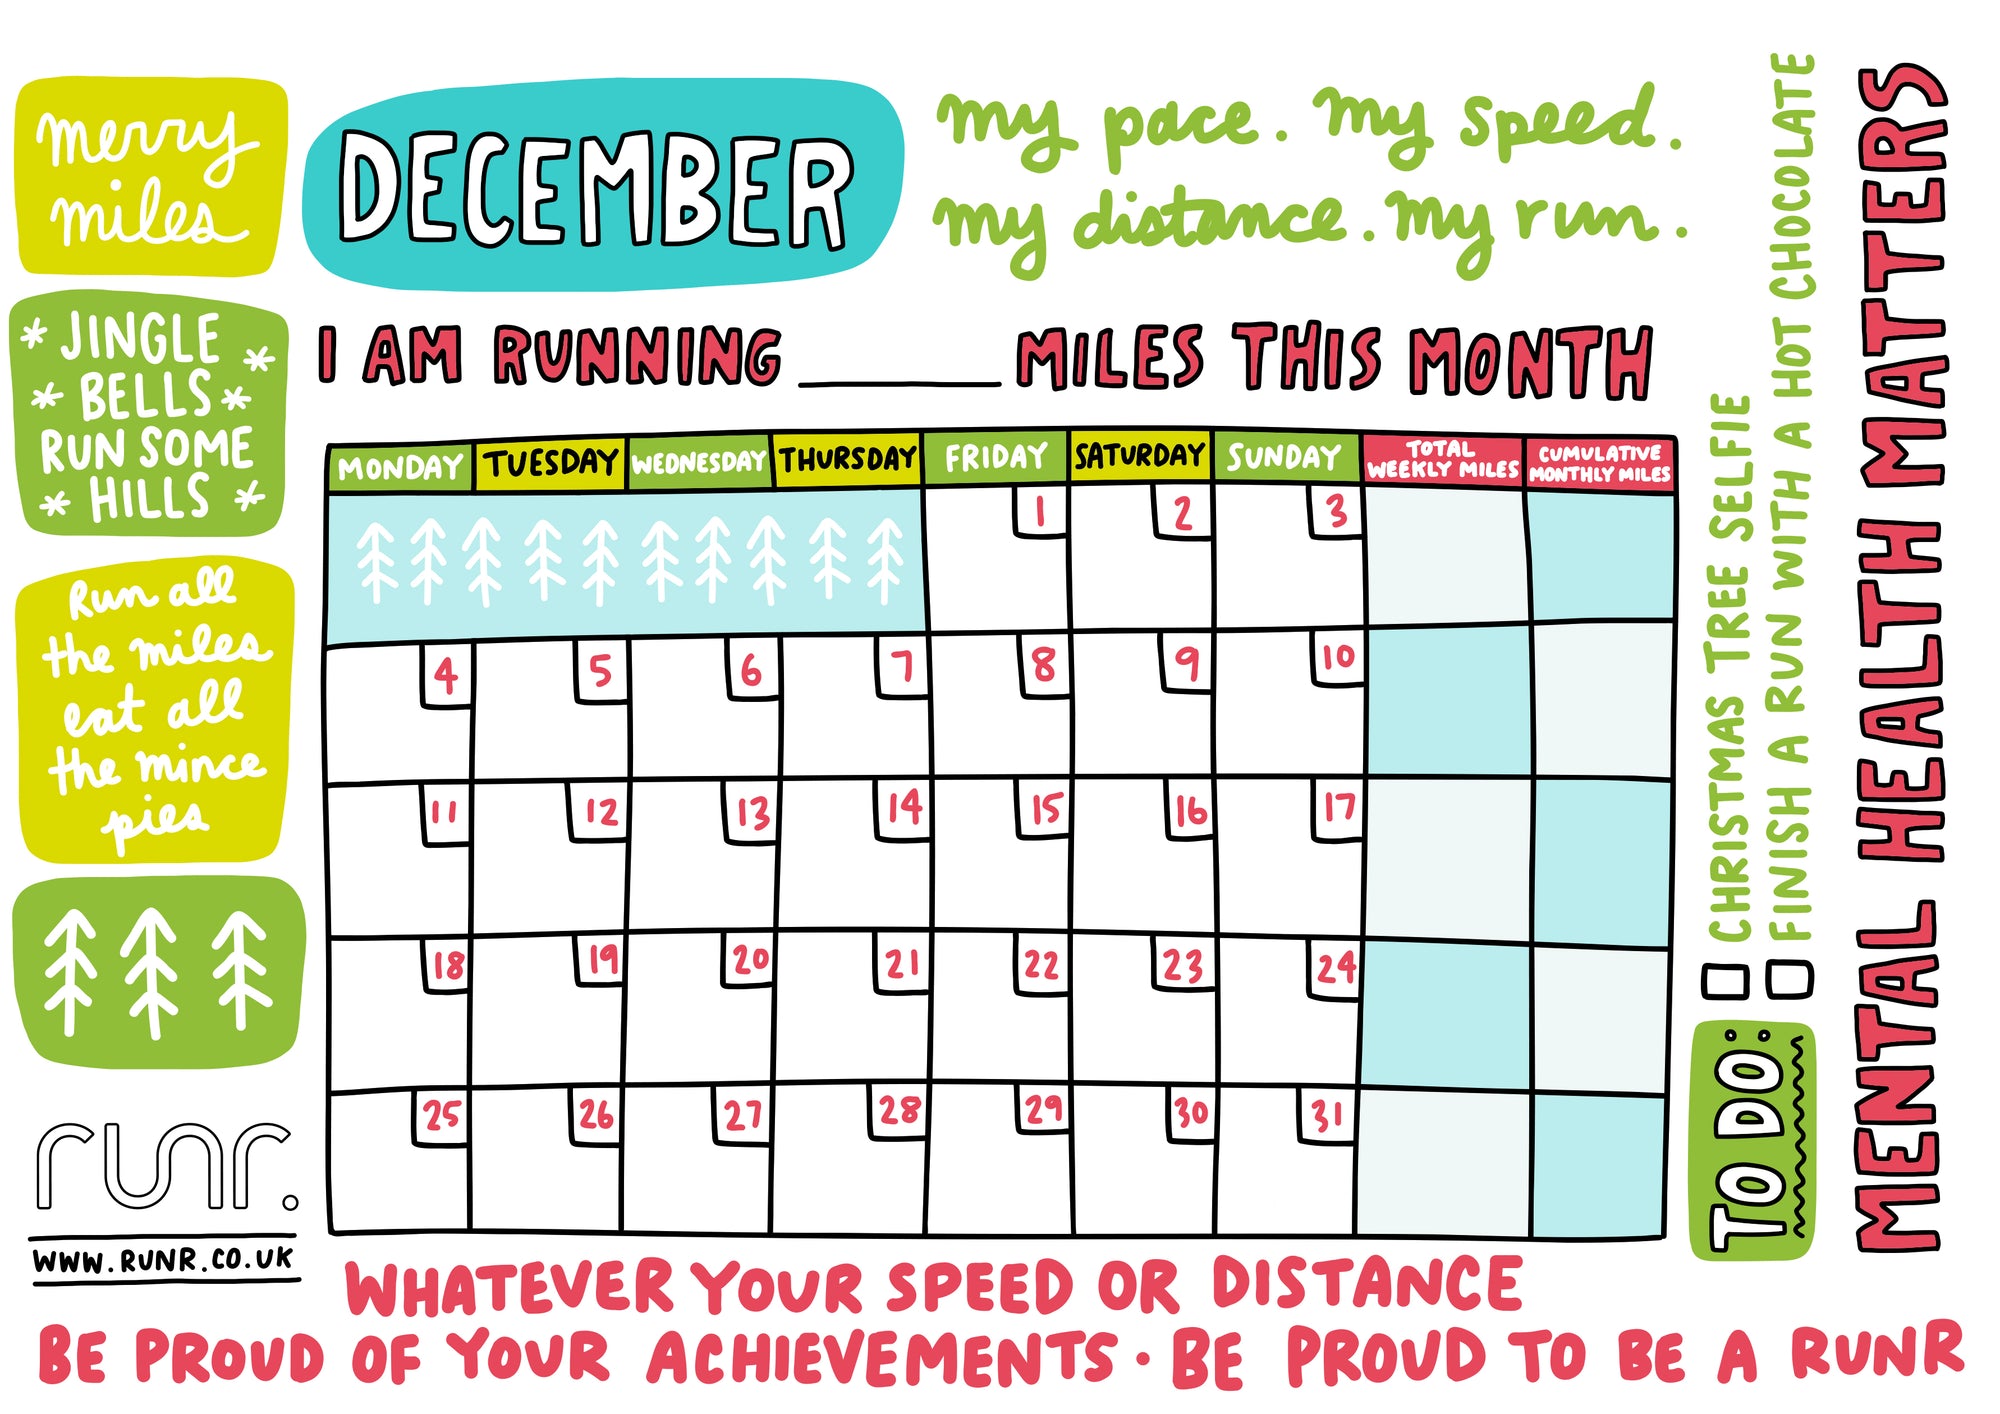 December 2023 Mileage Tracker - Free to Download!